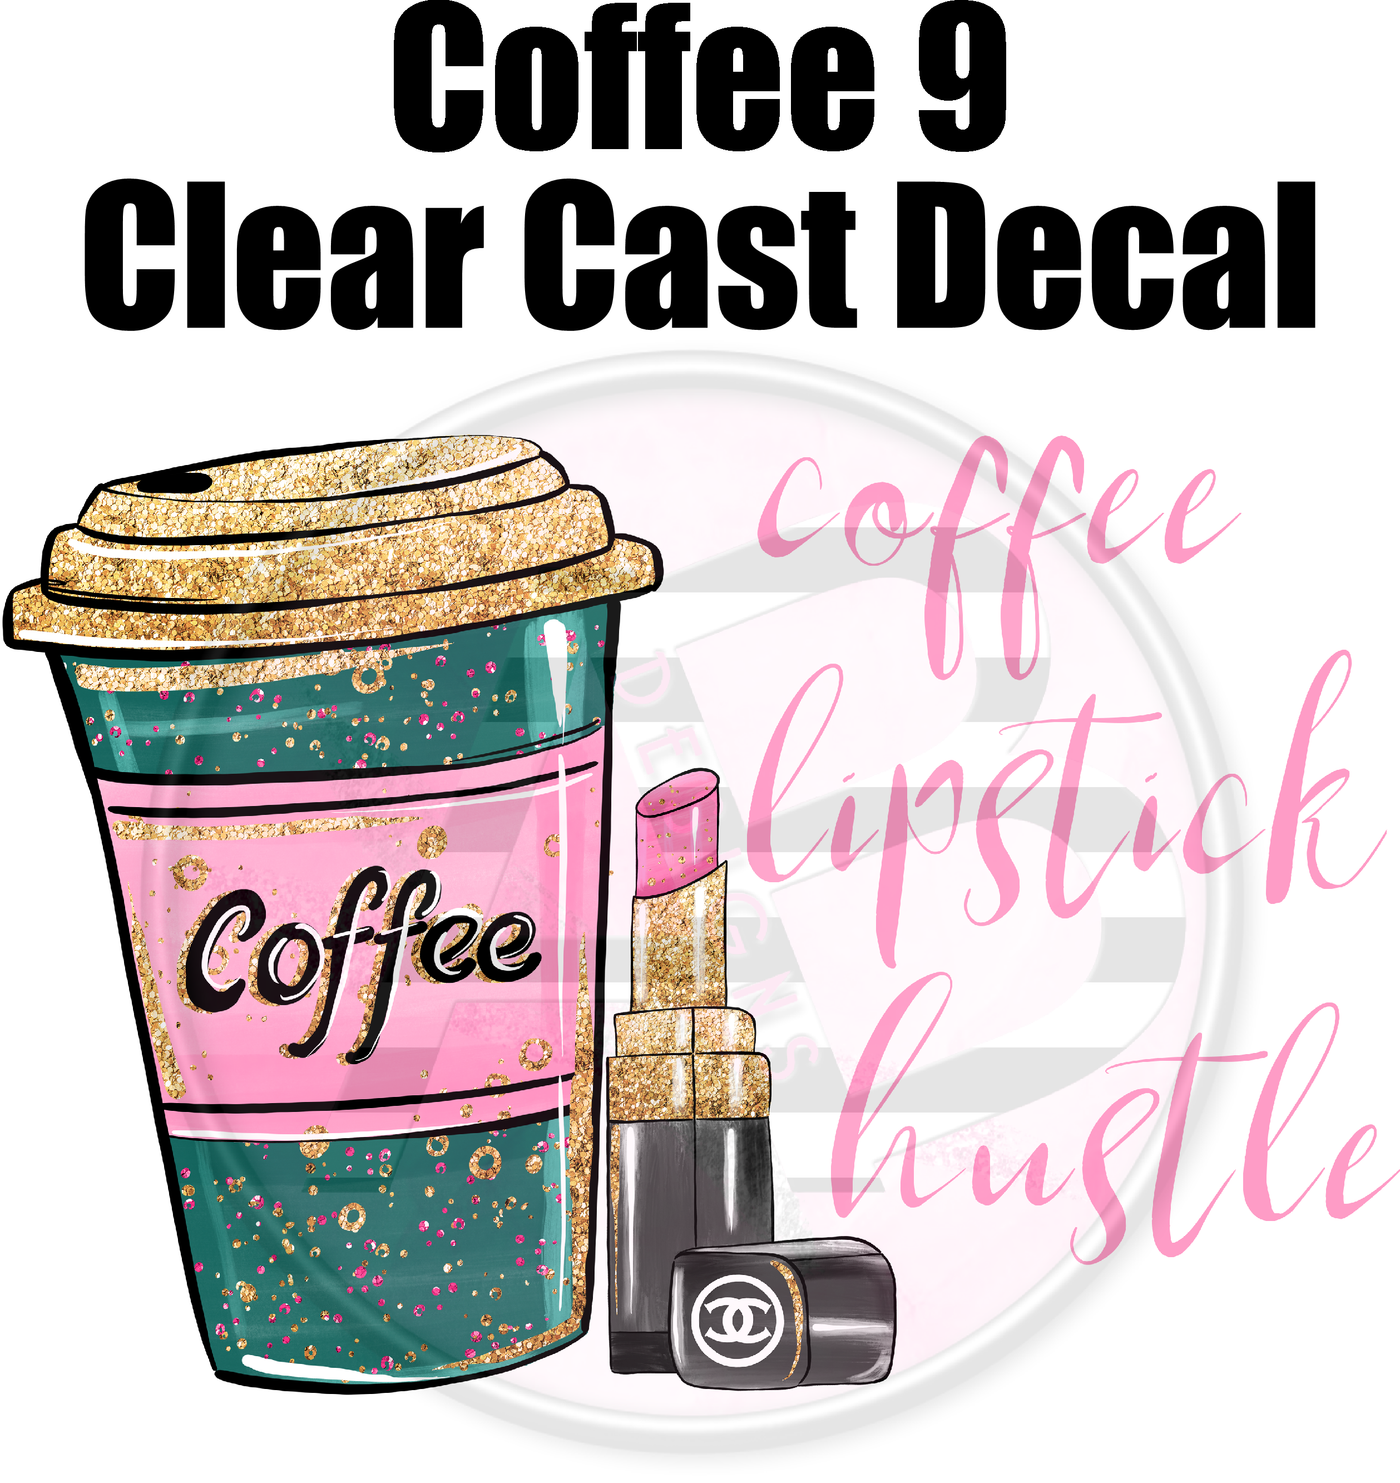 Coffee 9 - Clear Cast Decal